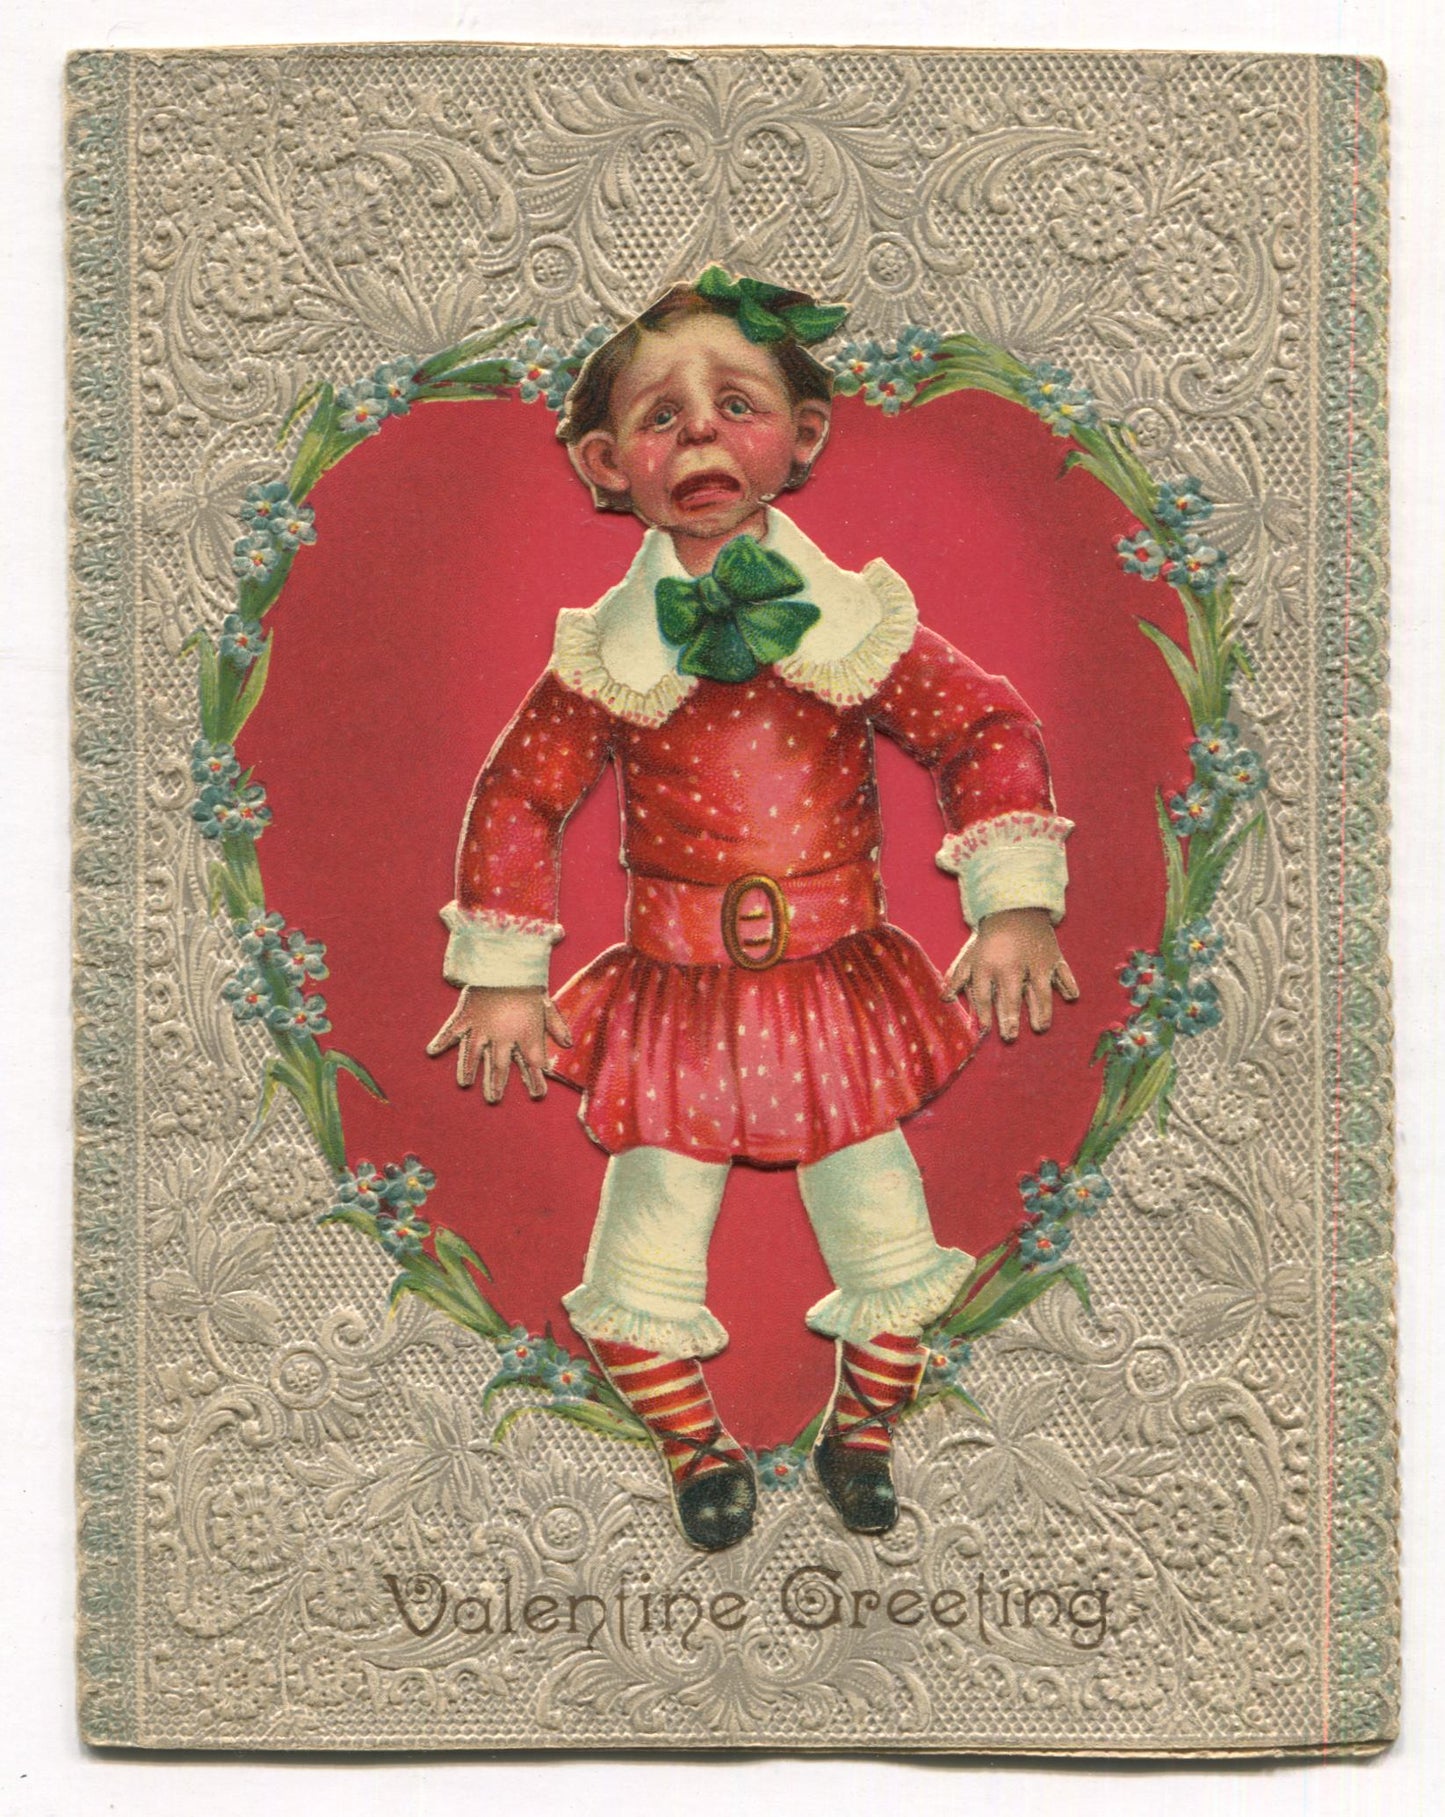 Antique Valentine Greeting Card, Dated 1903 - "Pain" - 5" x 6.5"